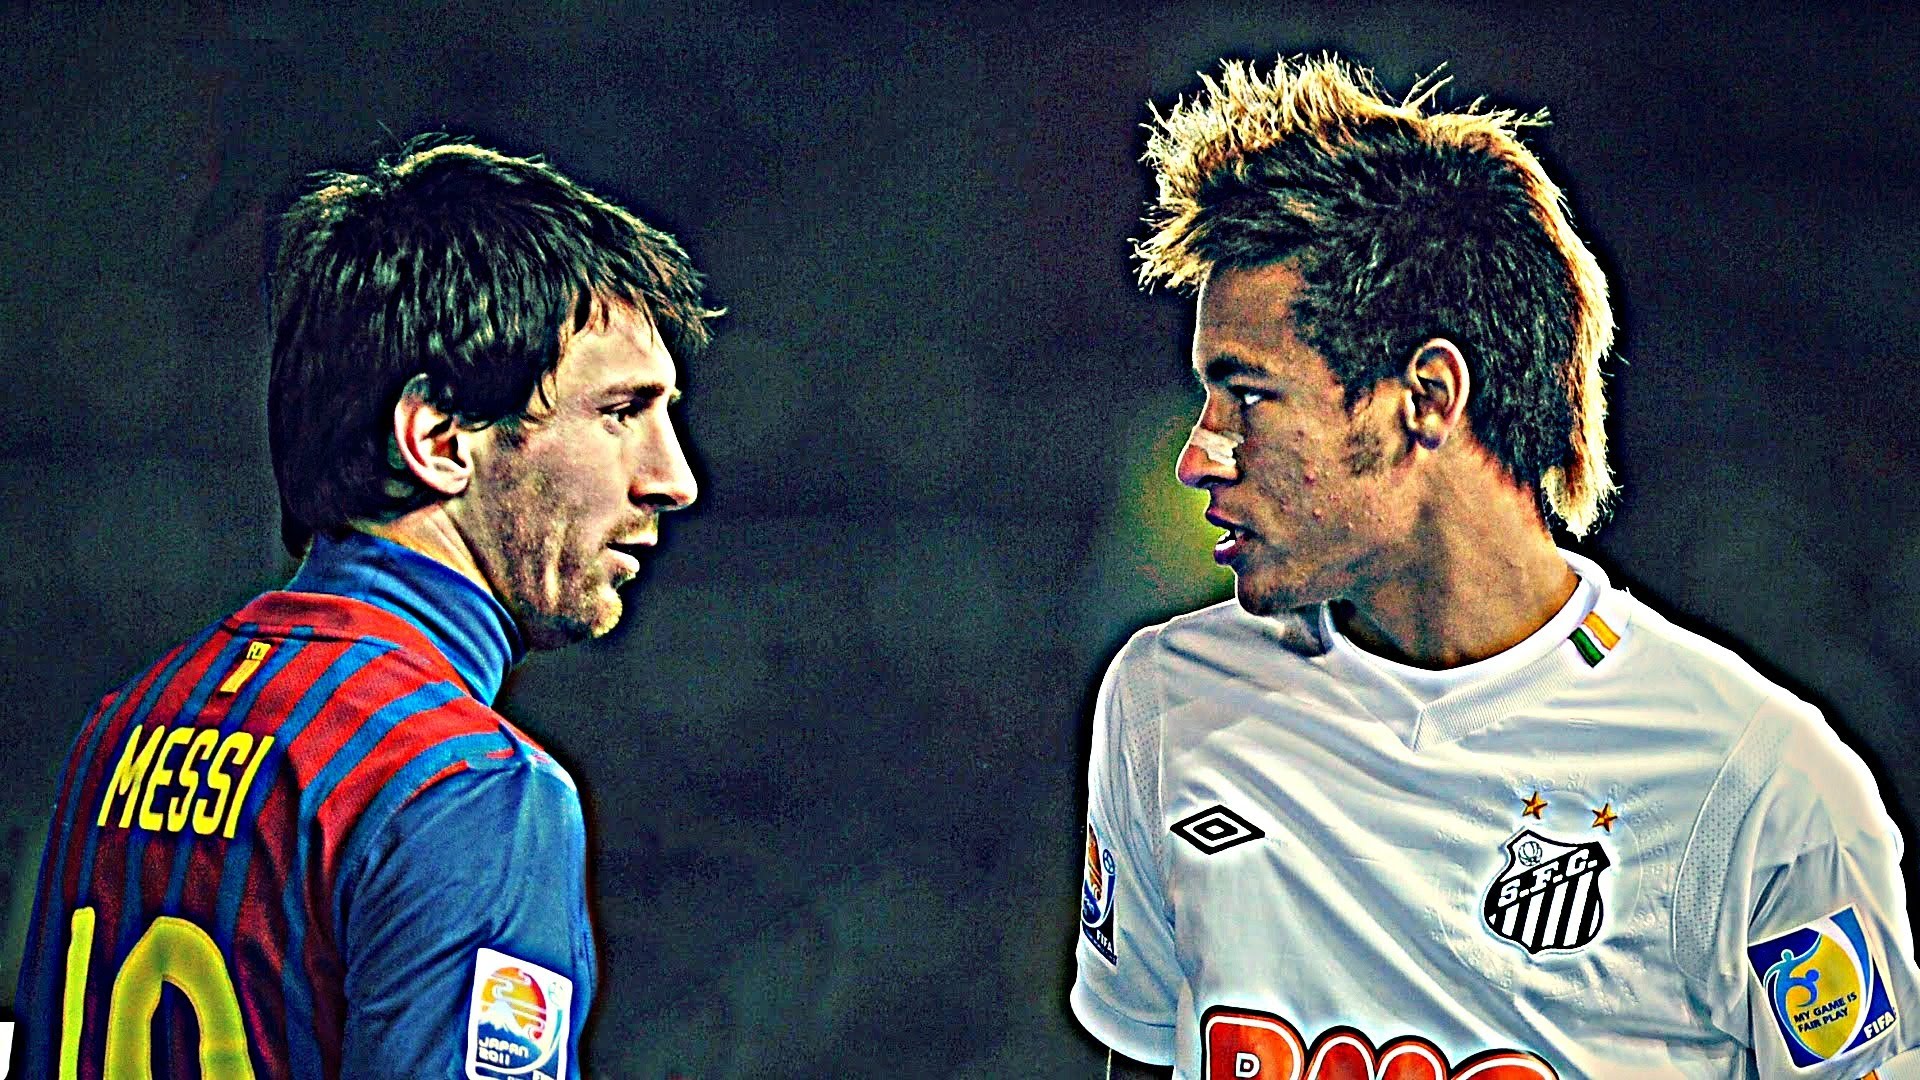 Displaying Image For Neymar Jr And Messi Wallpaper